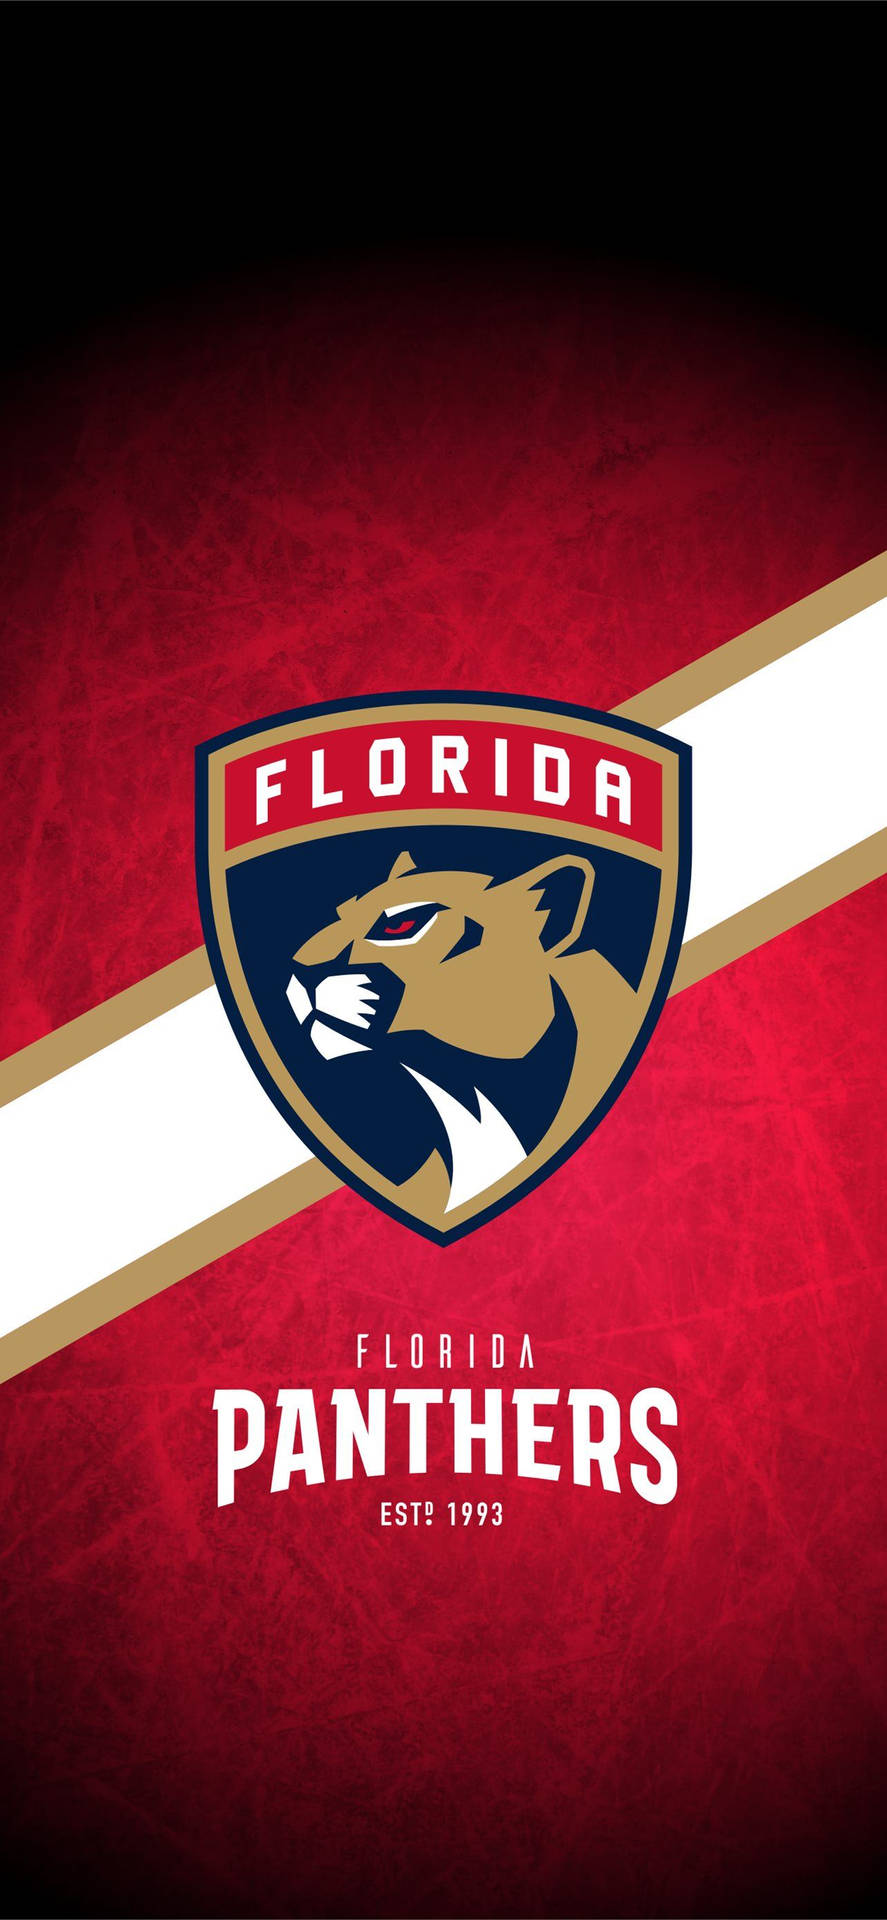 Florida Panthers Hockey Team in Action Wallpaper